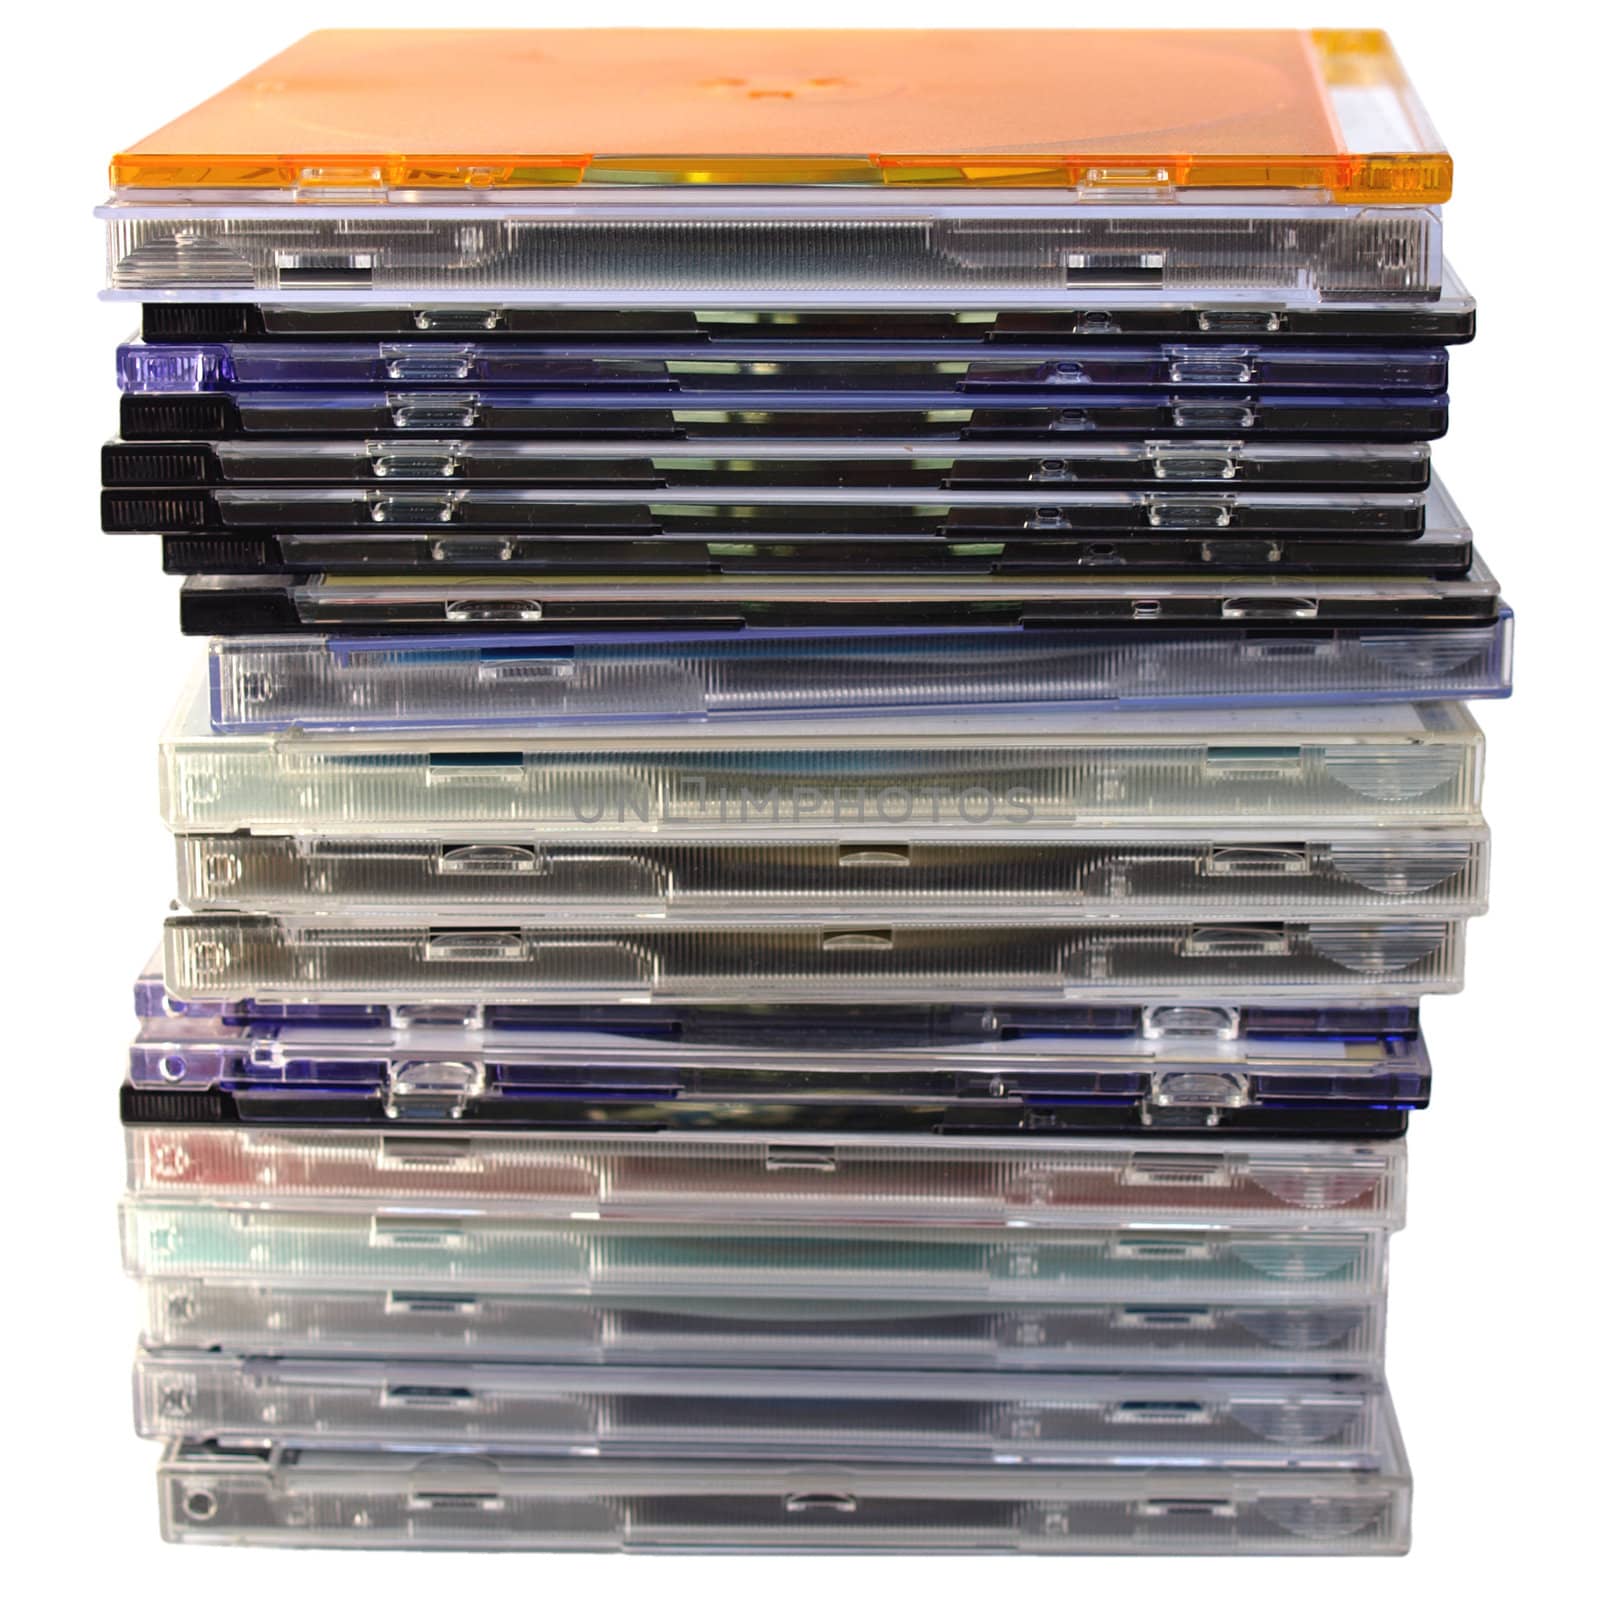 Pile of cd and dvd